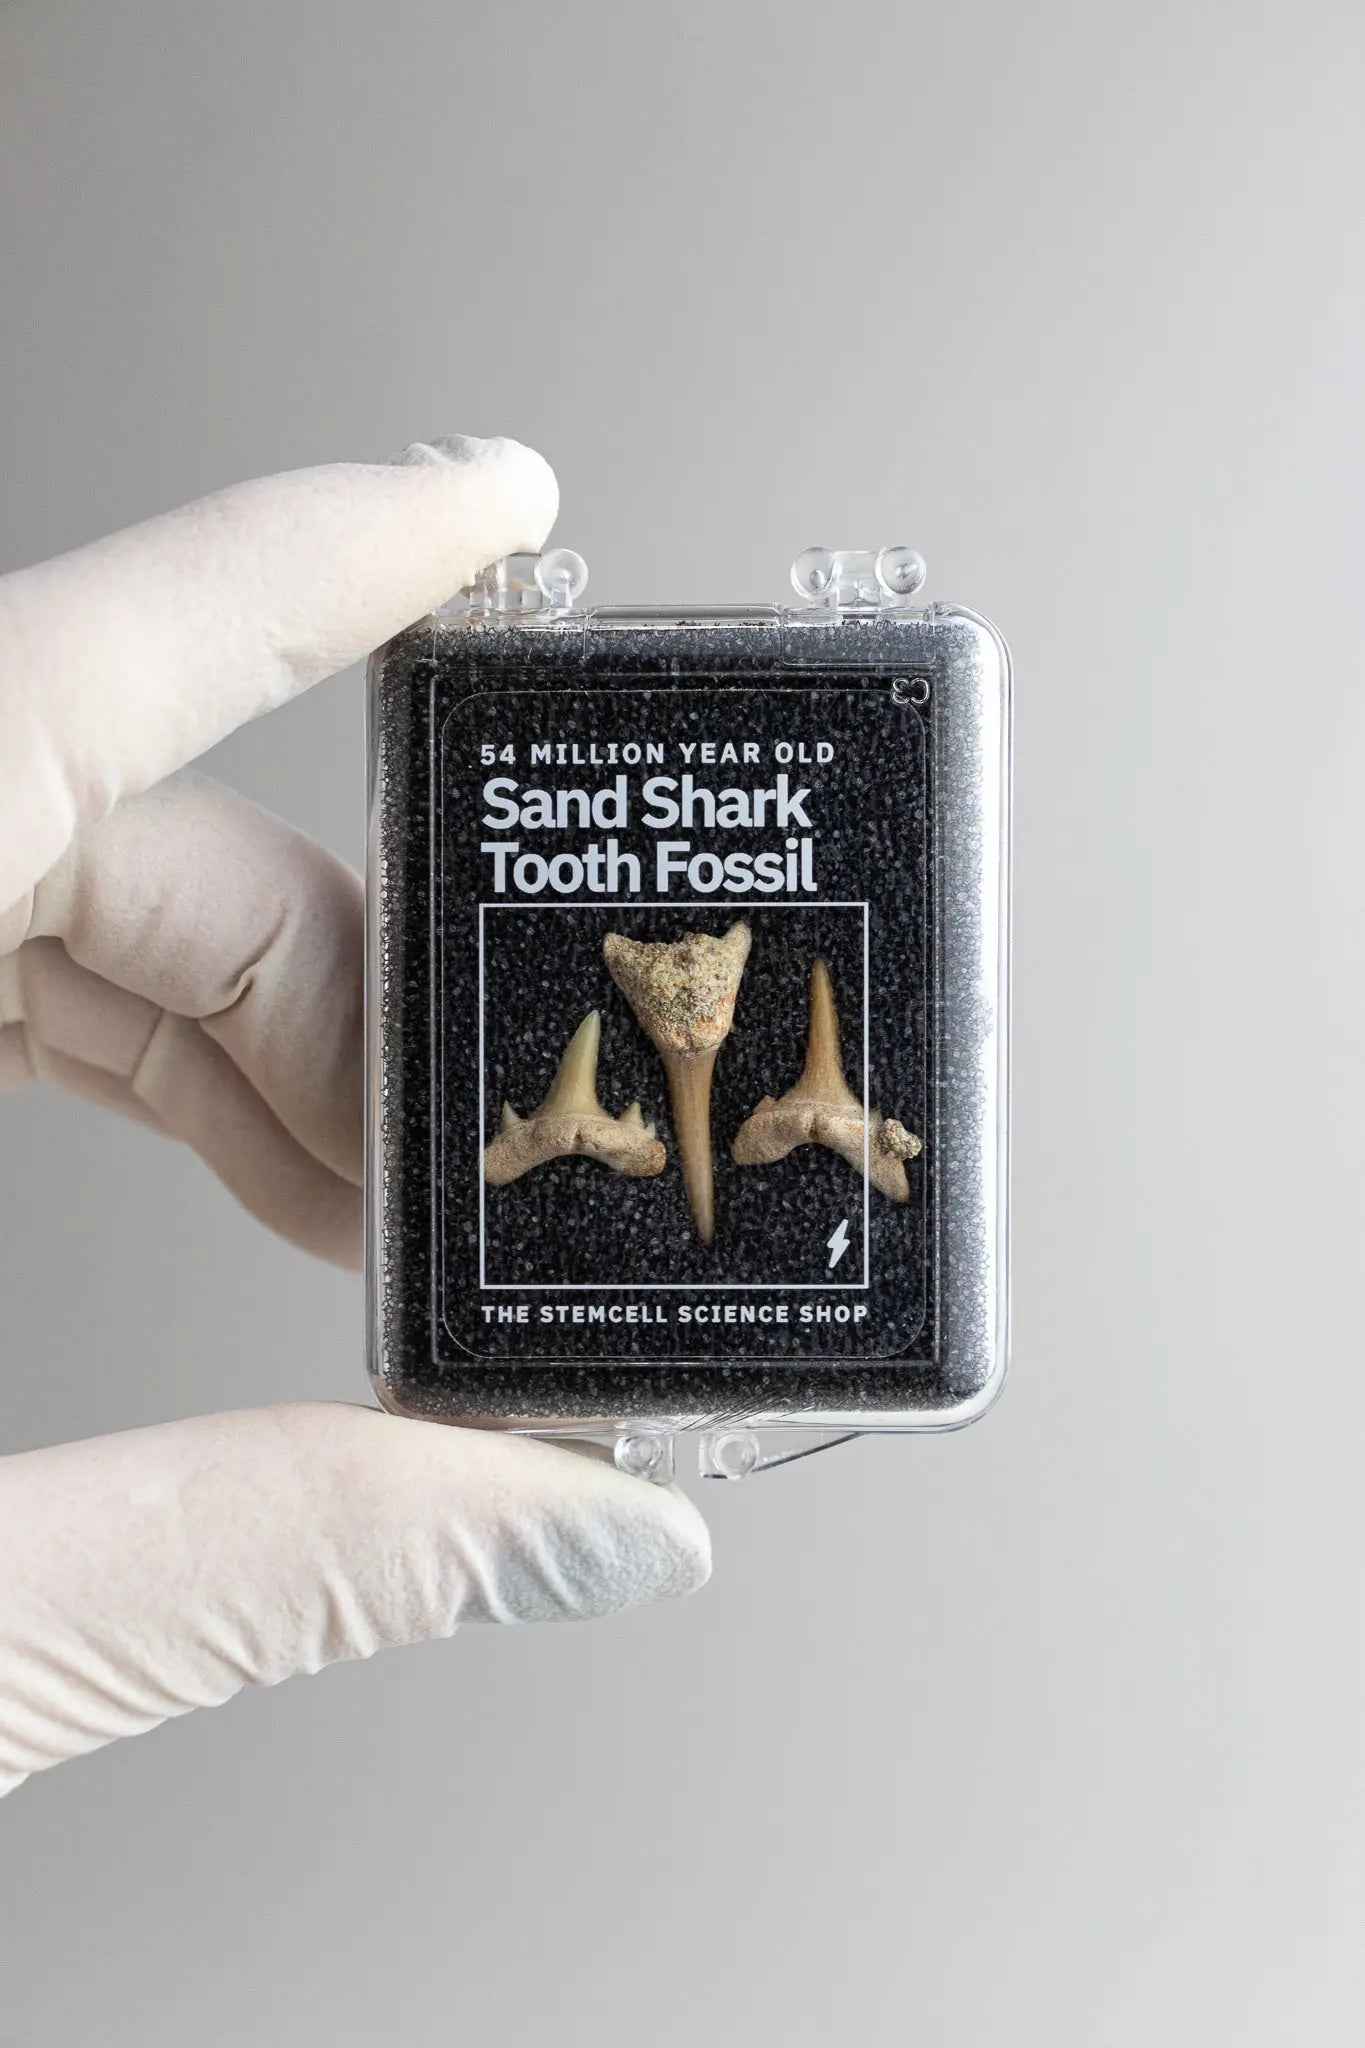 Sand Shark Tooth Fossil - Stemcell Science Shop